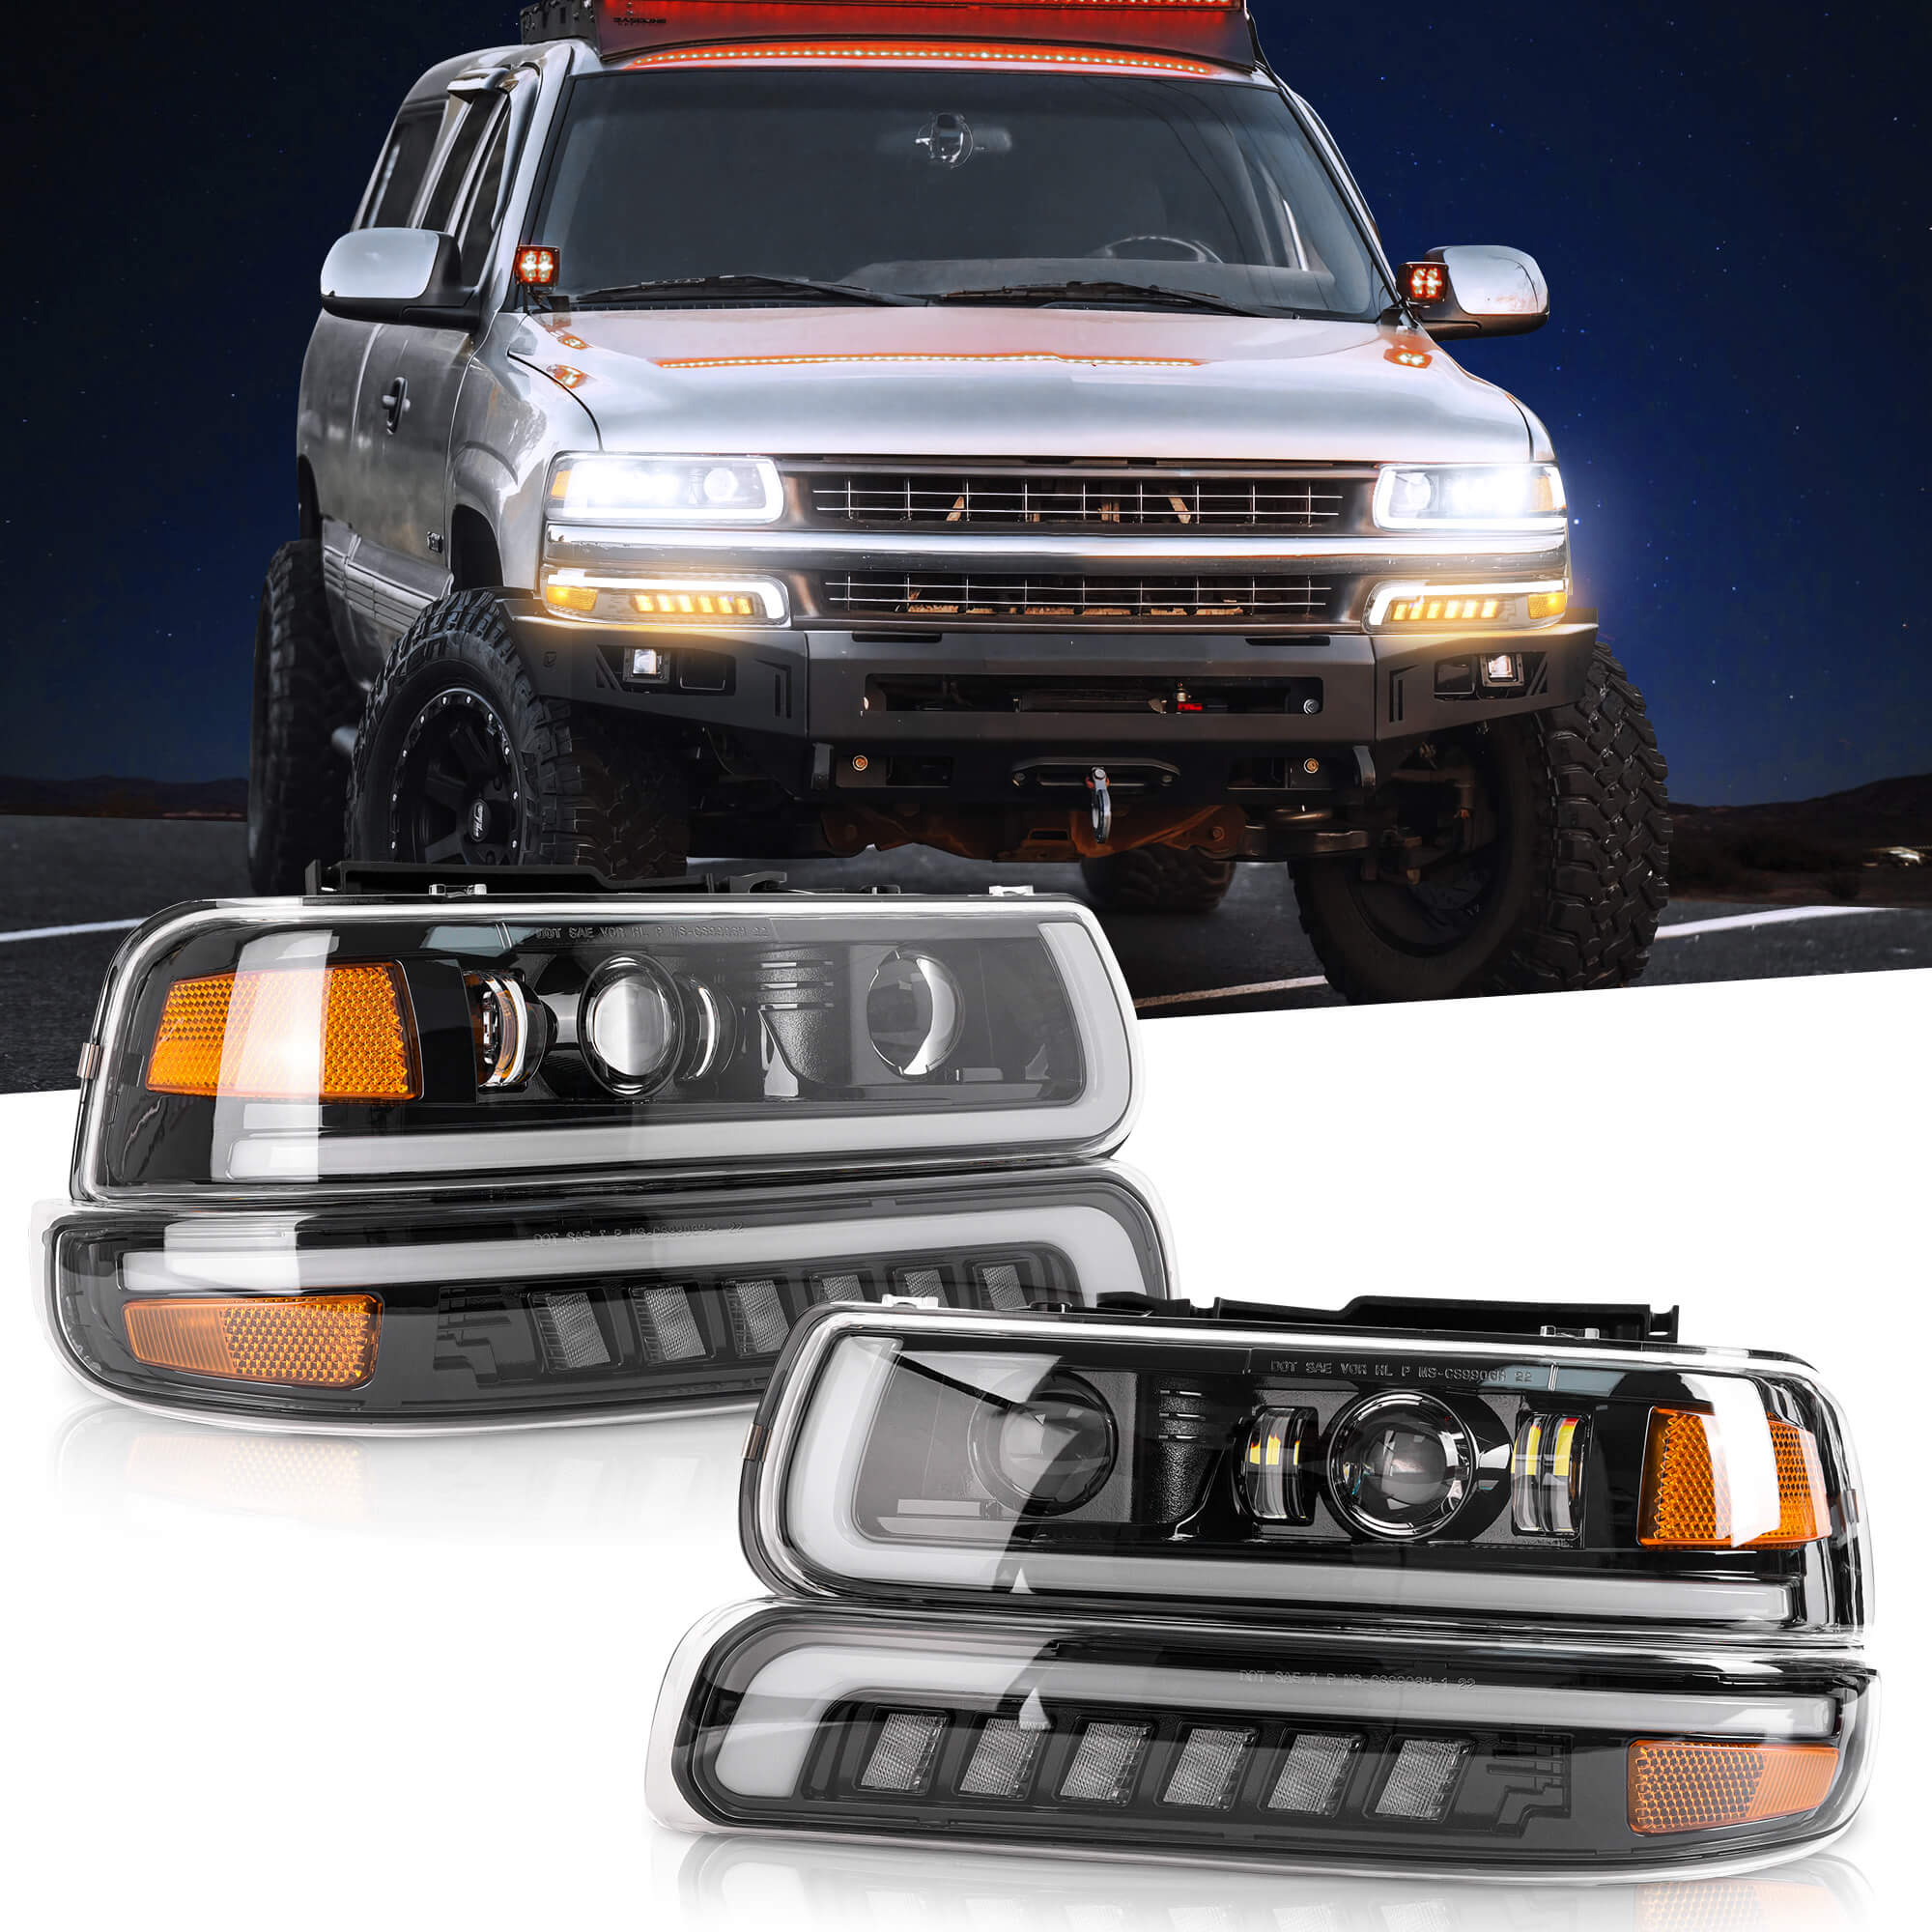 2pc Chrome Headlights Assembly Turn Signal Lamps for Chevy Chevrolet Silverado 1500/2500 (99-02 ) 1500HD/2500 HD/3500 (01-02), Suburban 1500/2500/Tahoe (00-06)